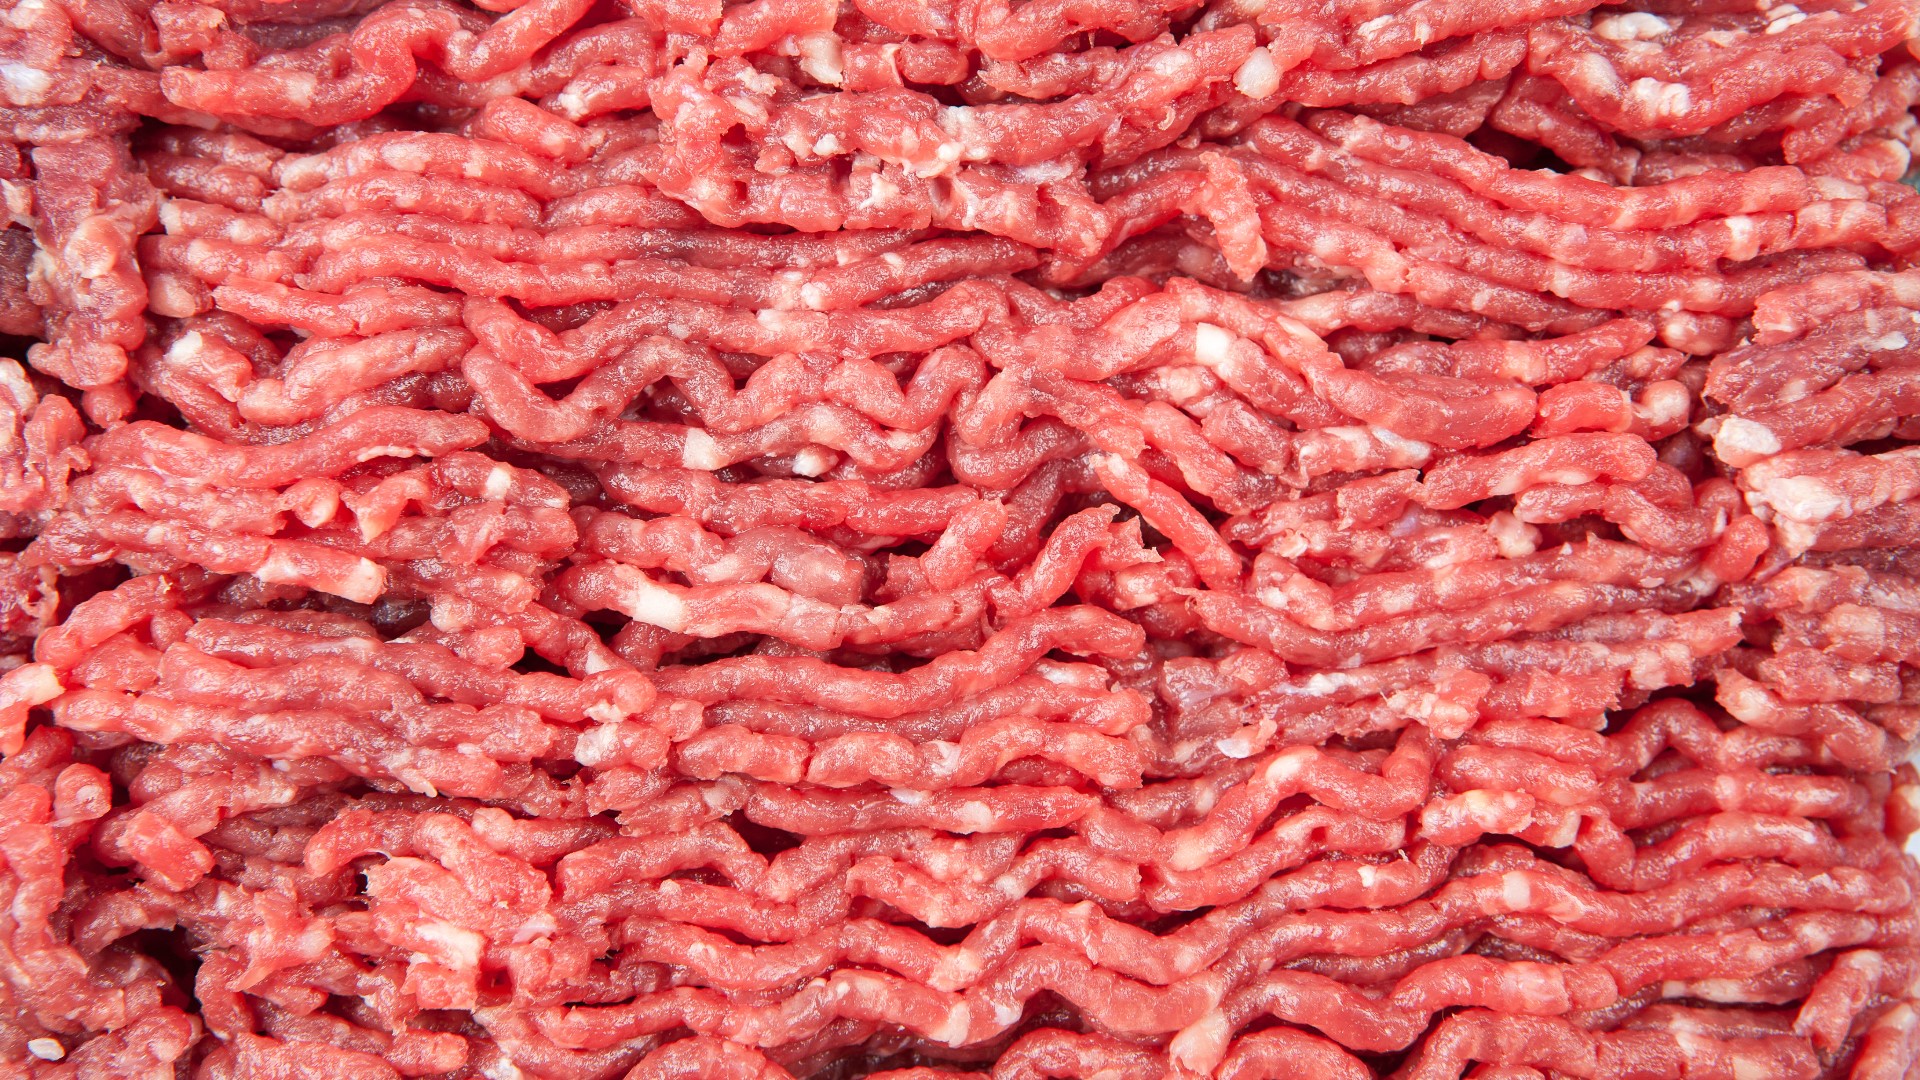 There is now a nationwide public health alert for ground beef over the risk of e. coli.